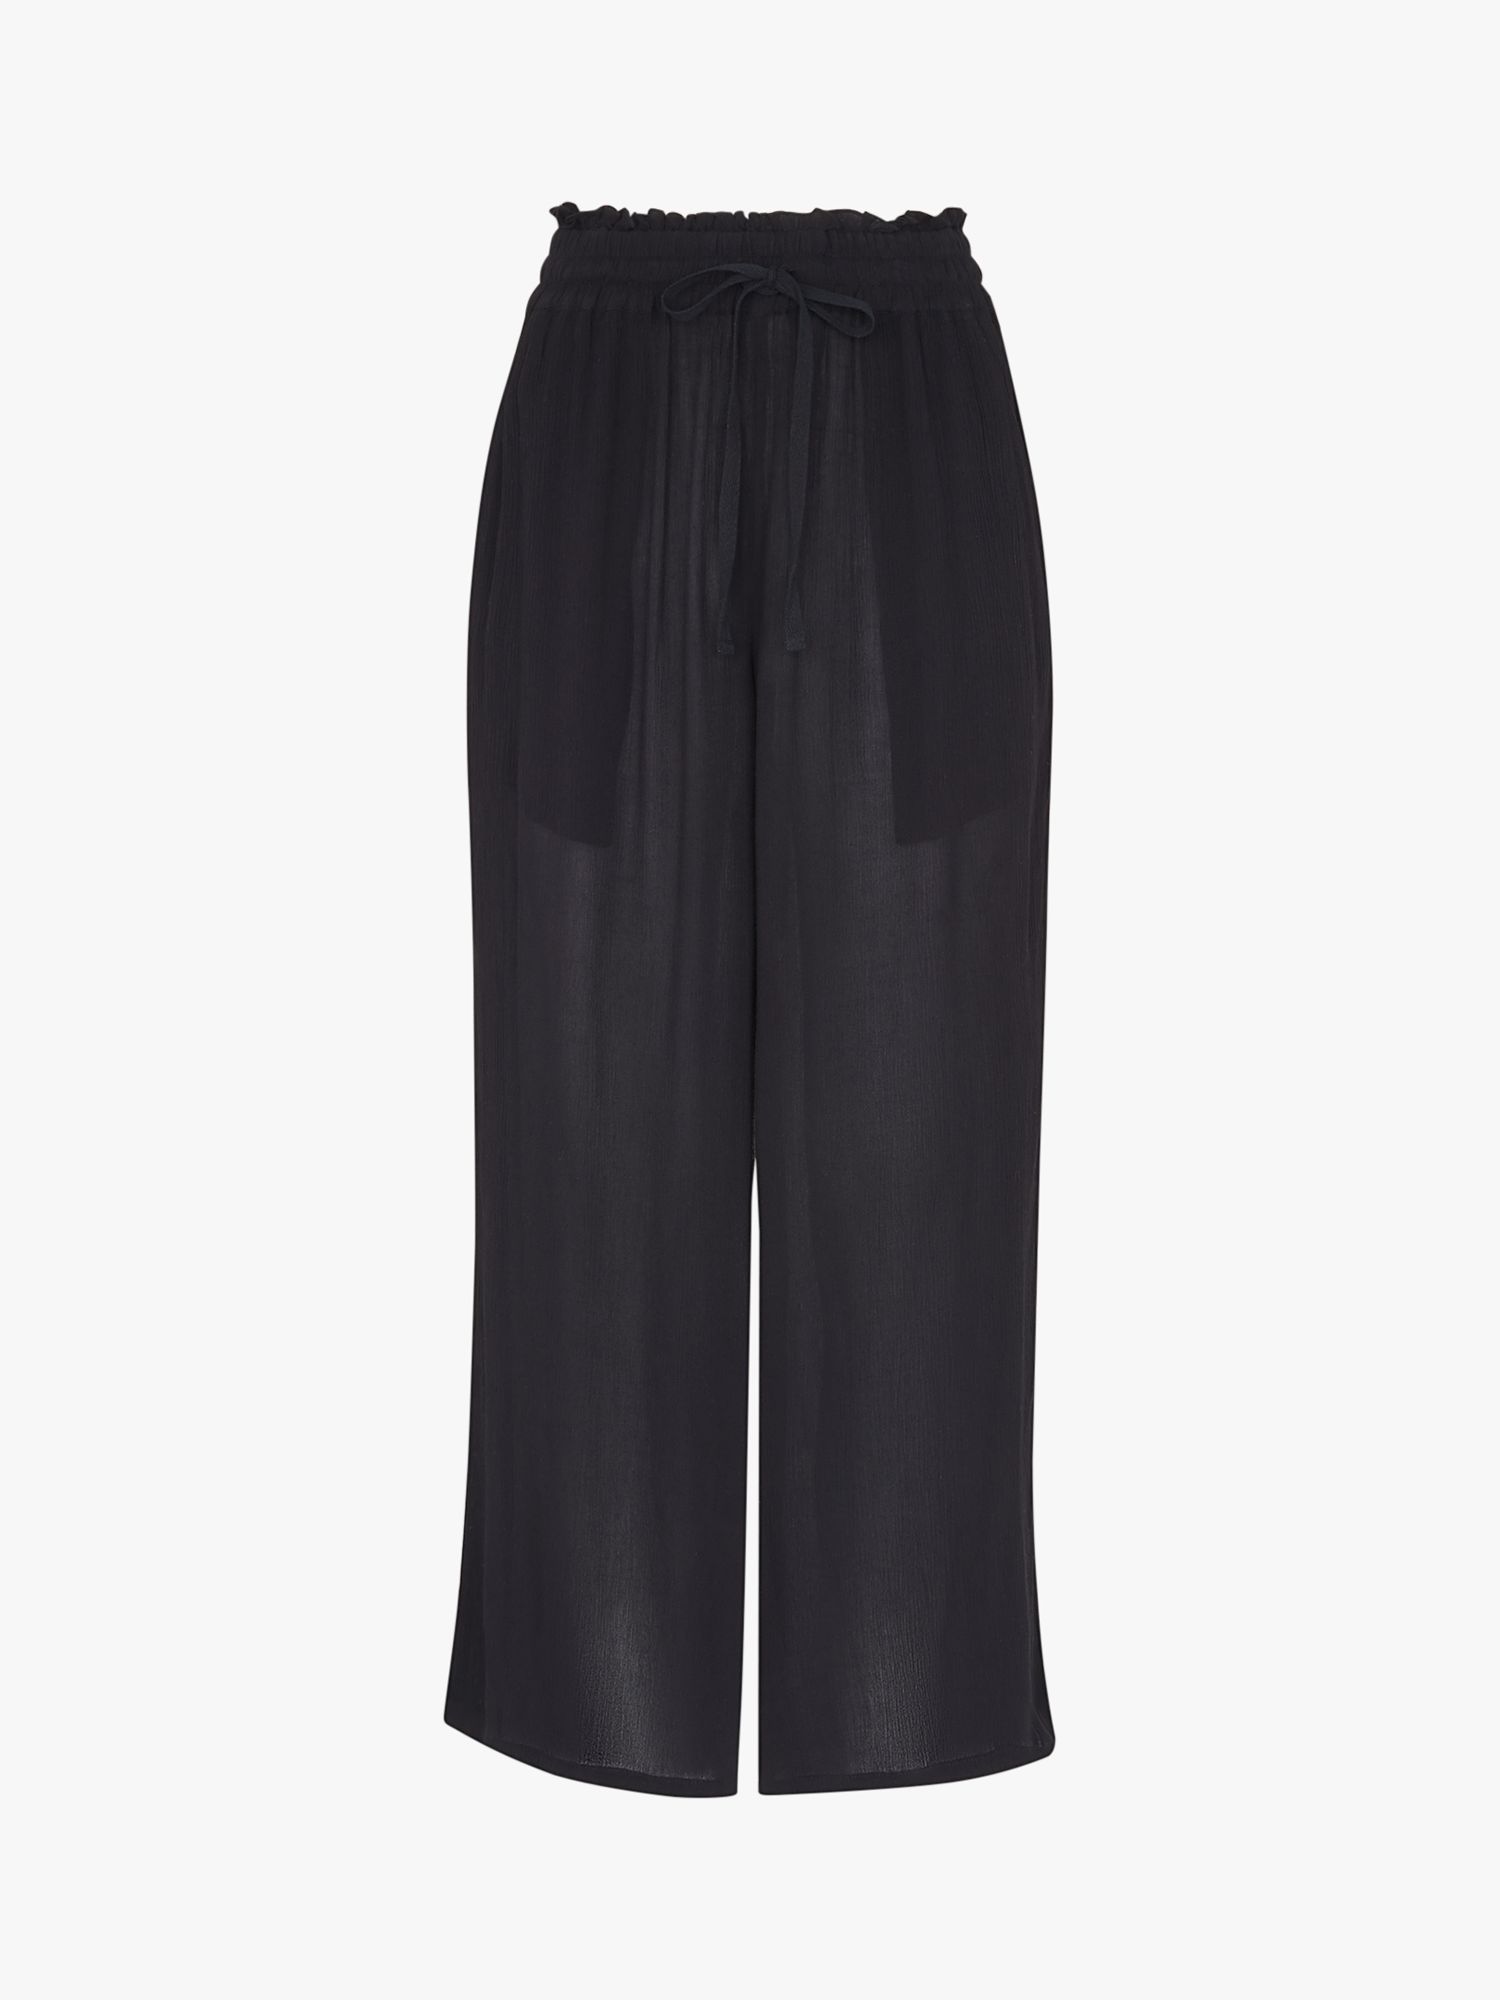 Whistles Imogen Fluid Cropped Trousers, Black, 6